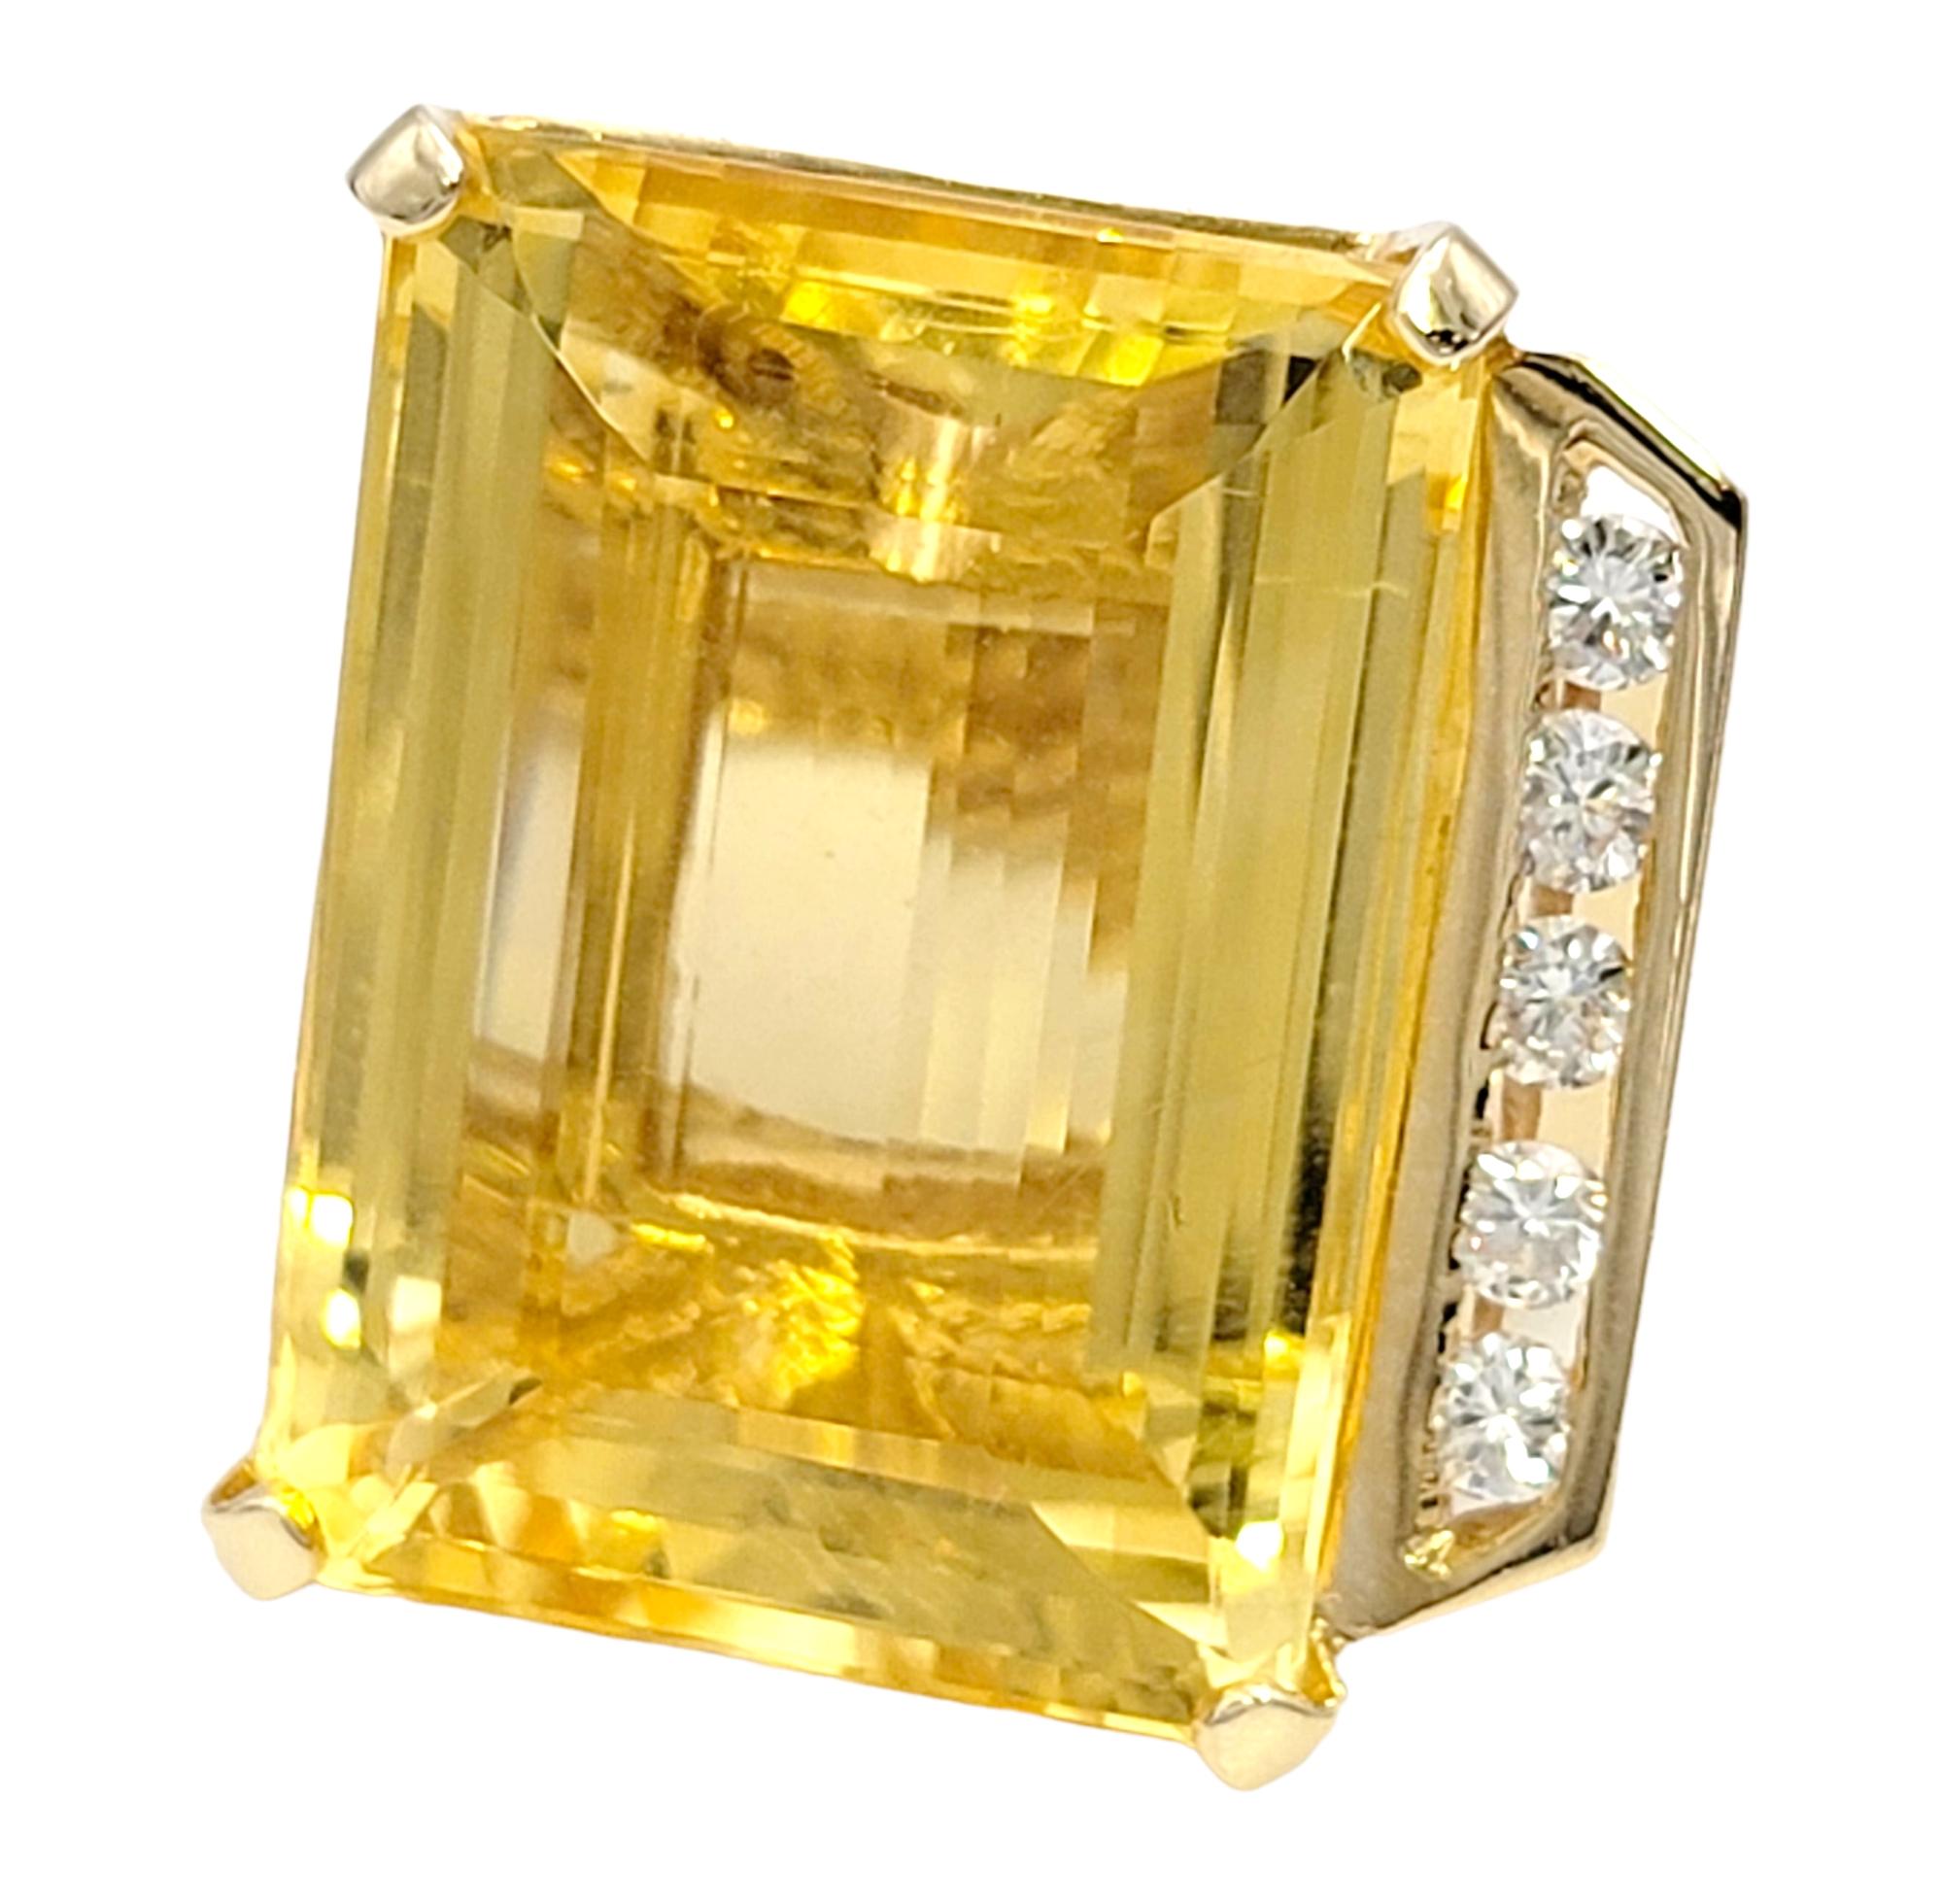 Ring size: 6.25

Stunningly beautiful citrine and diamond cocktail ring. This contemporary, eye-catching piece makes a big statement with its impressive size and bold color. The incredible emerald cut citrine stone is 4 prong set in polished 14